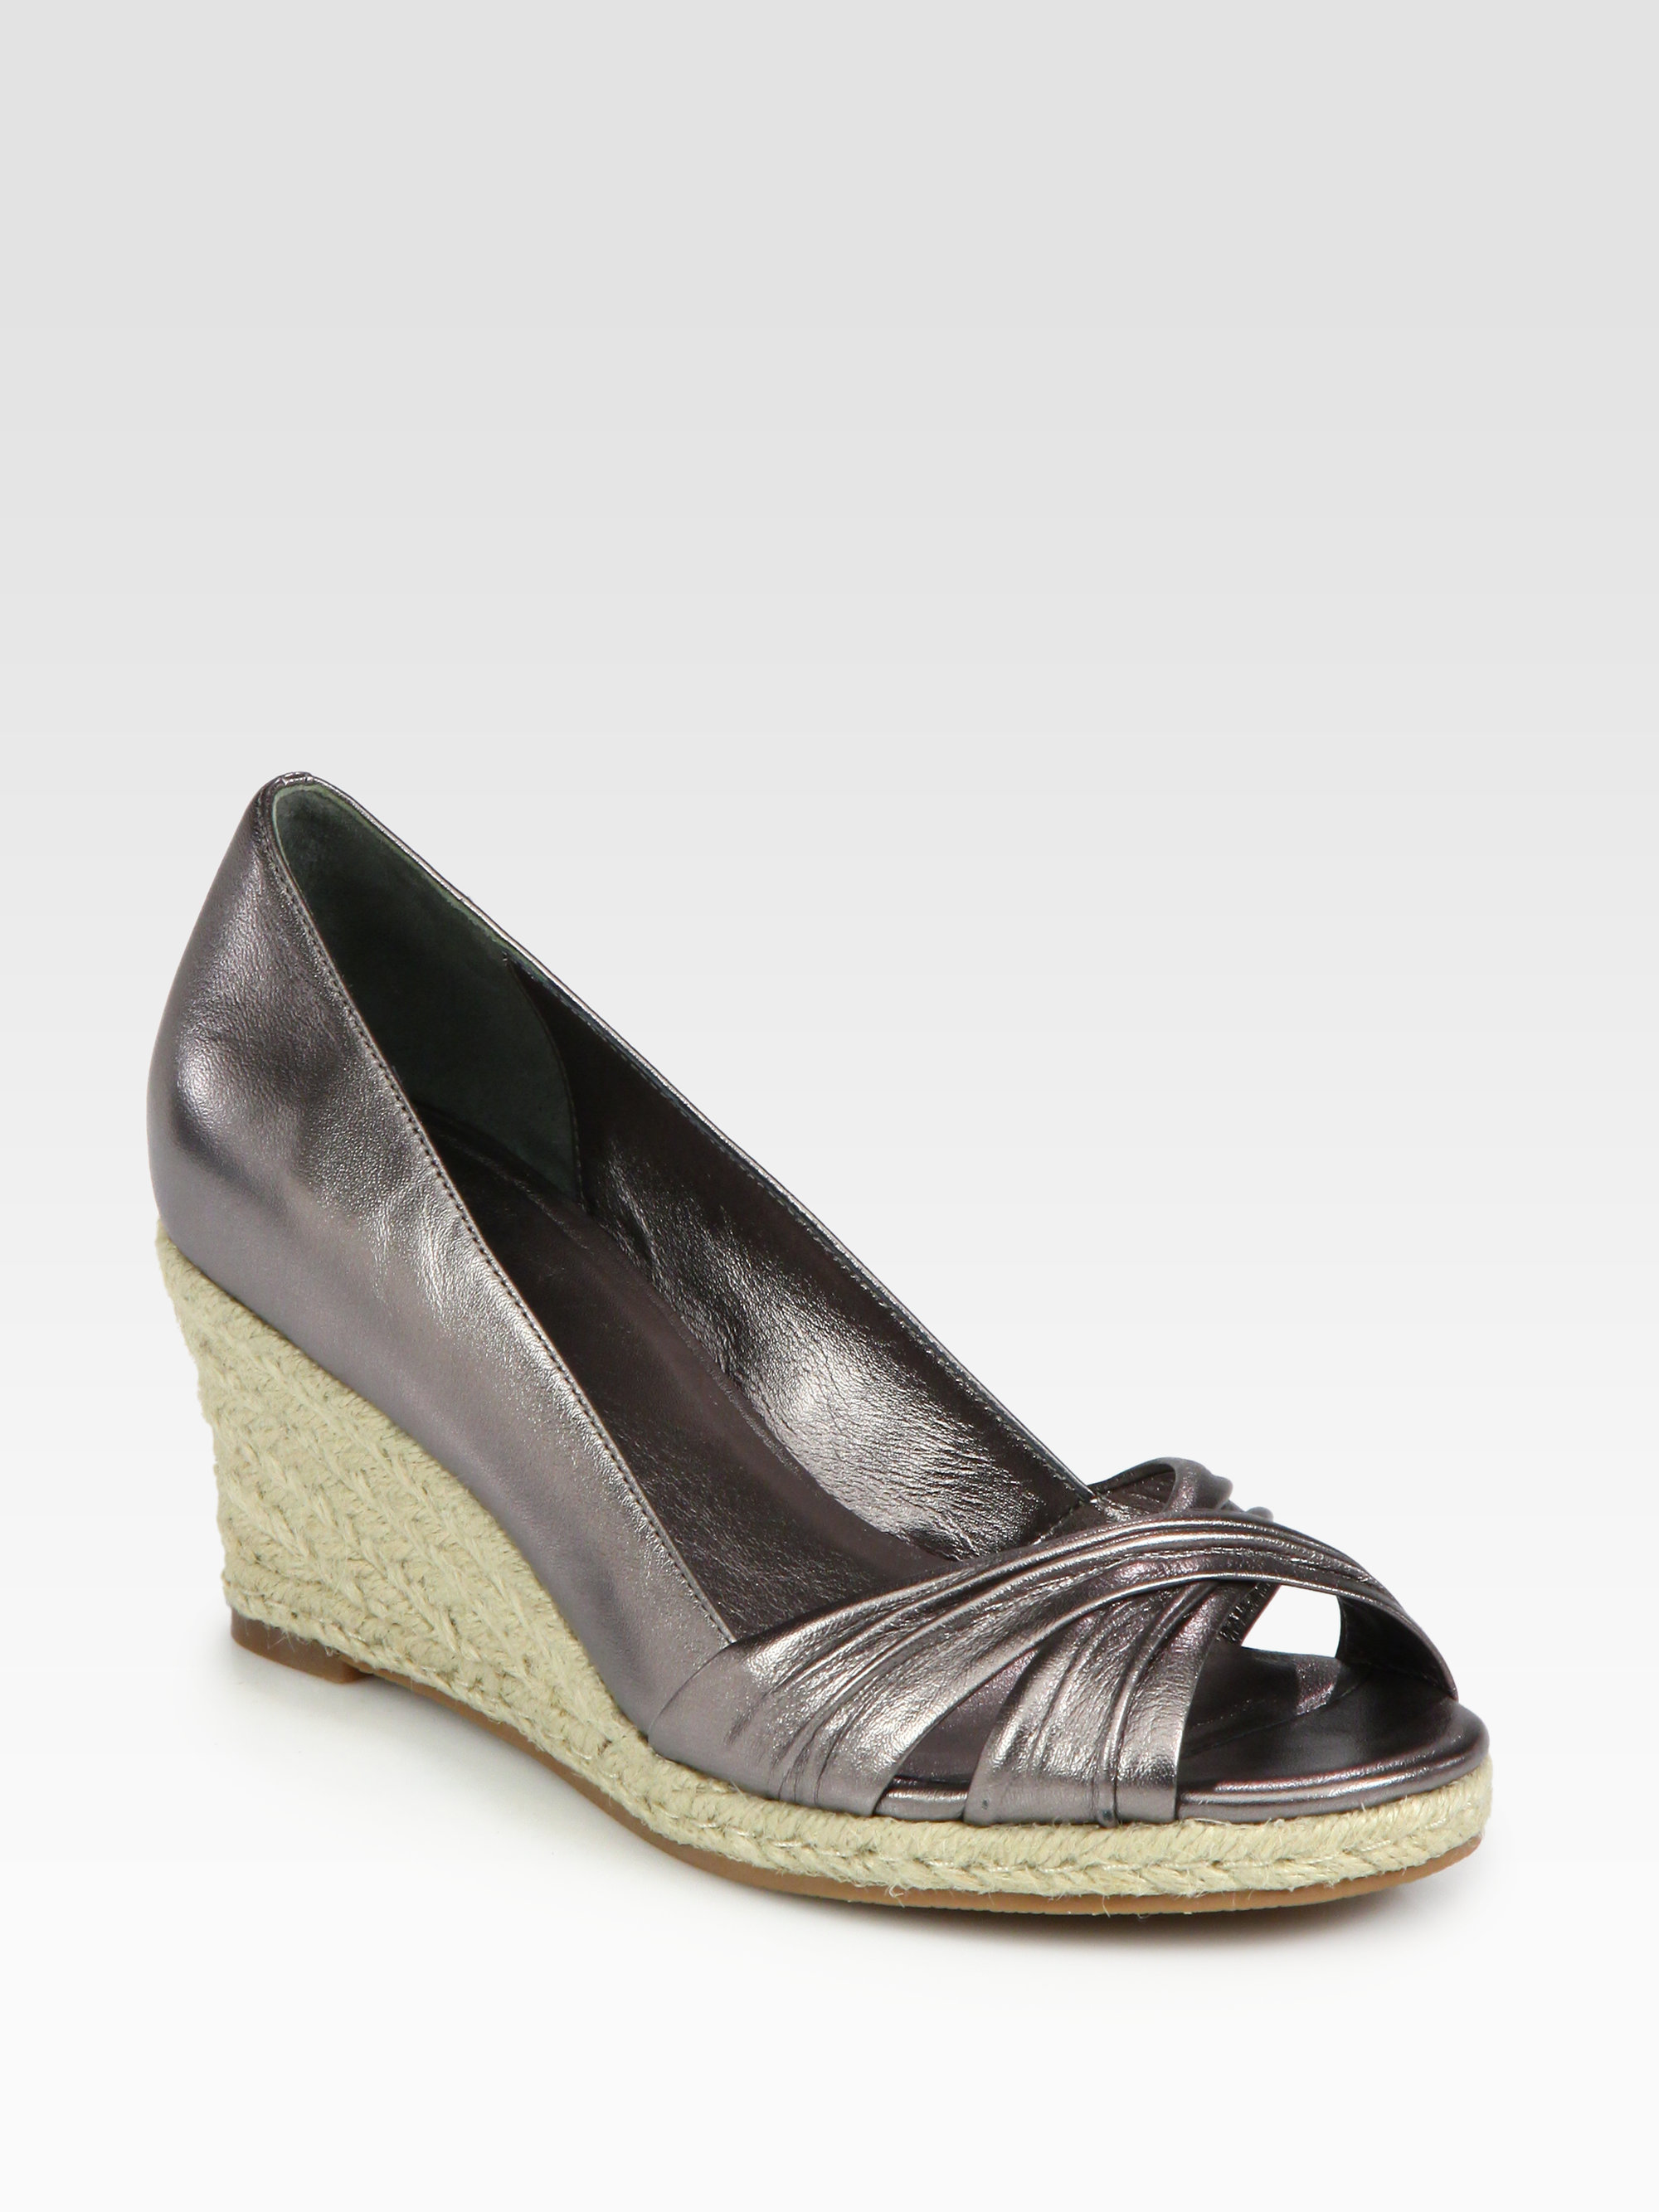 Cole Haan Air Camila Espadrille Metallic Leather Wedge Sandals in ...